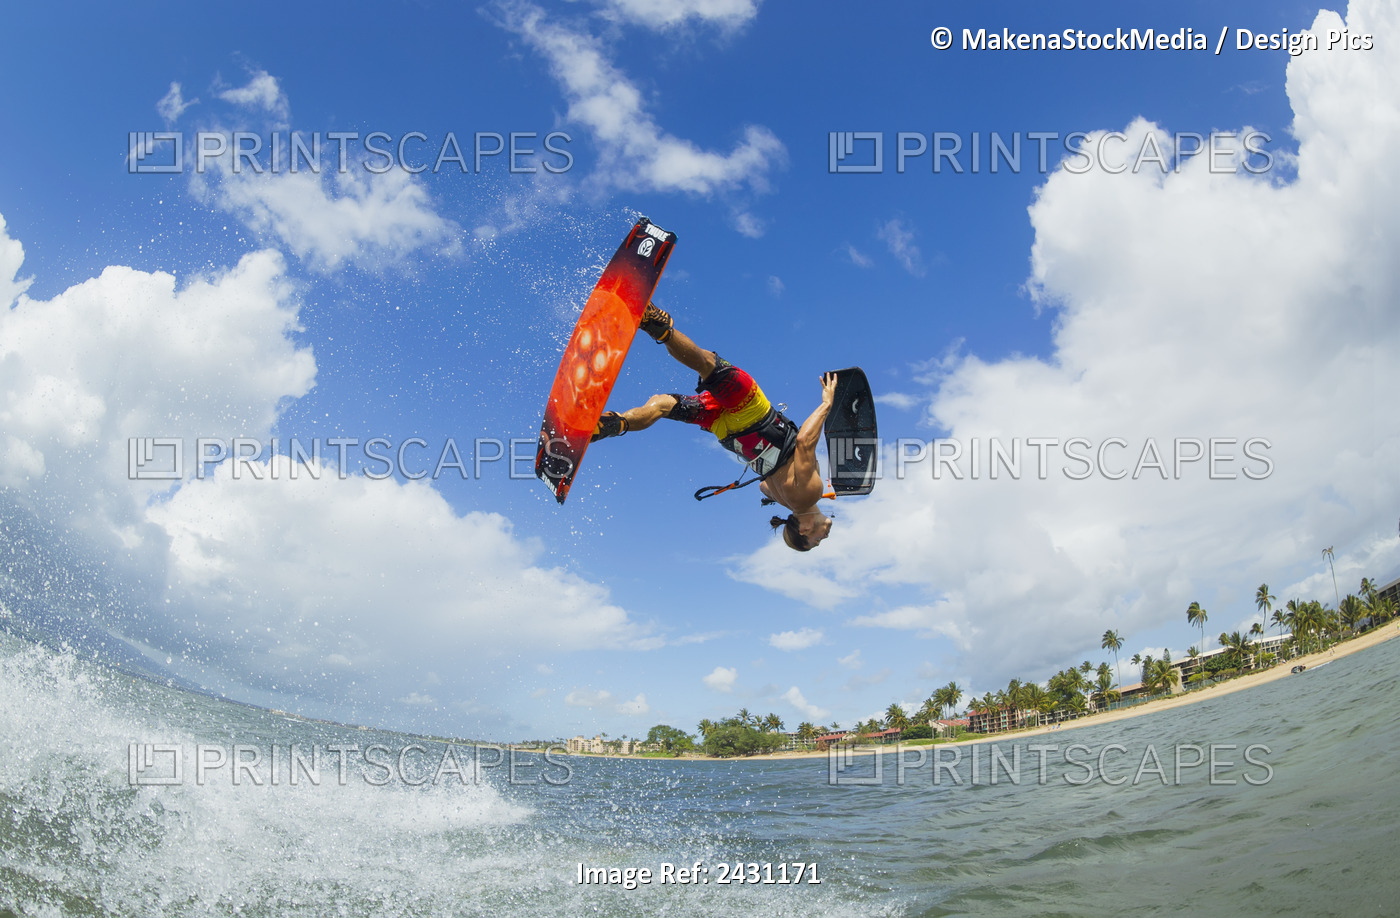 Professional Kiteboarder Niccolo Porcella Kiteboarding On The South Shore Of ...